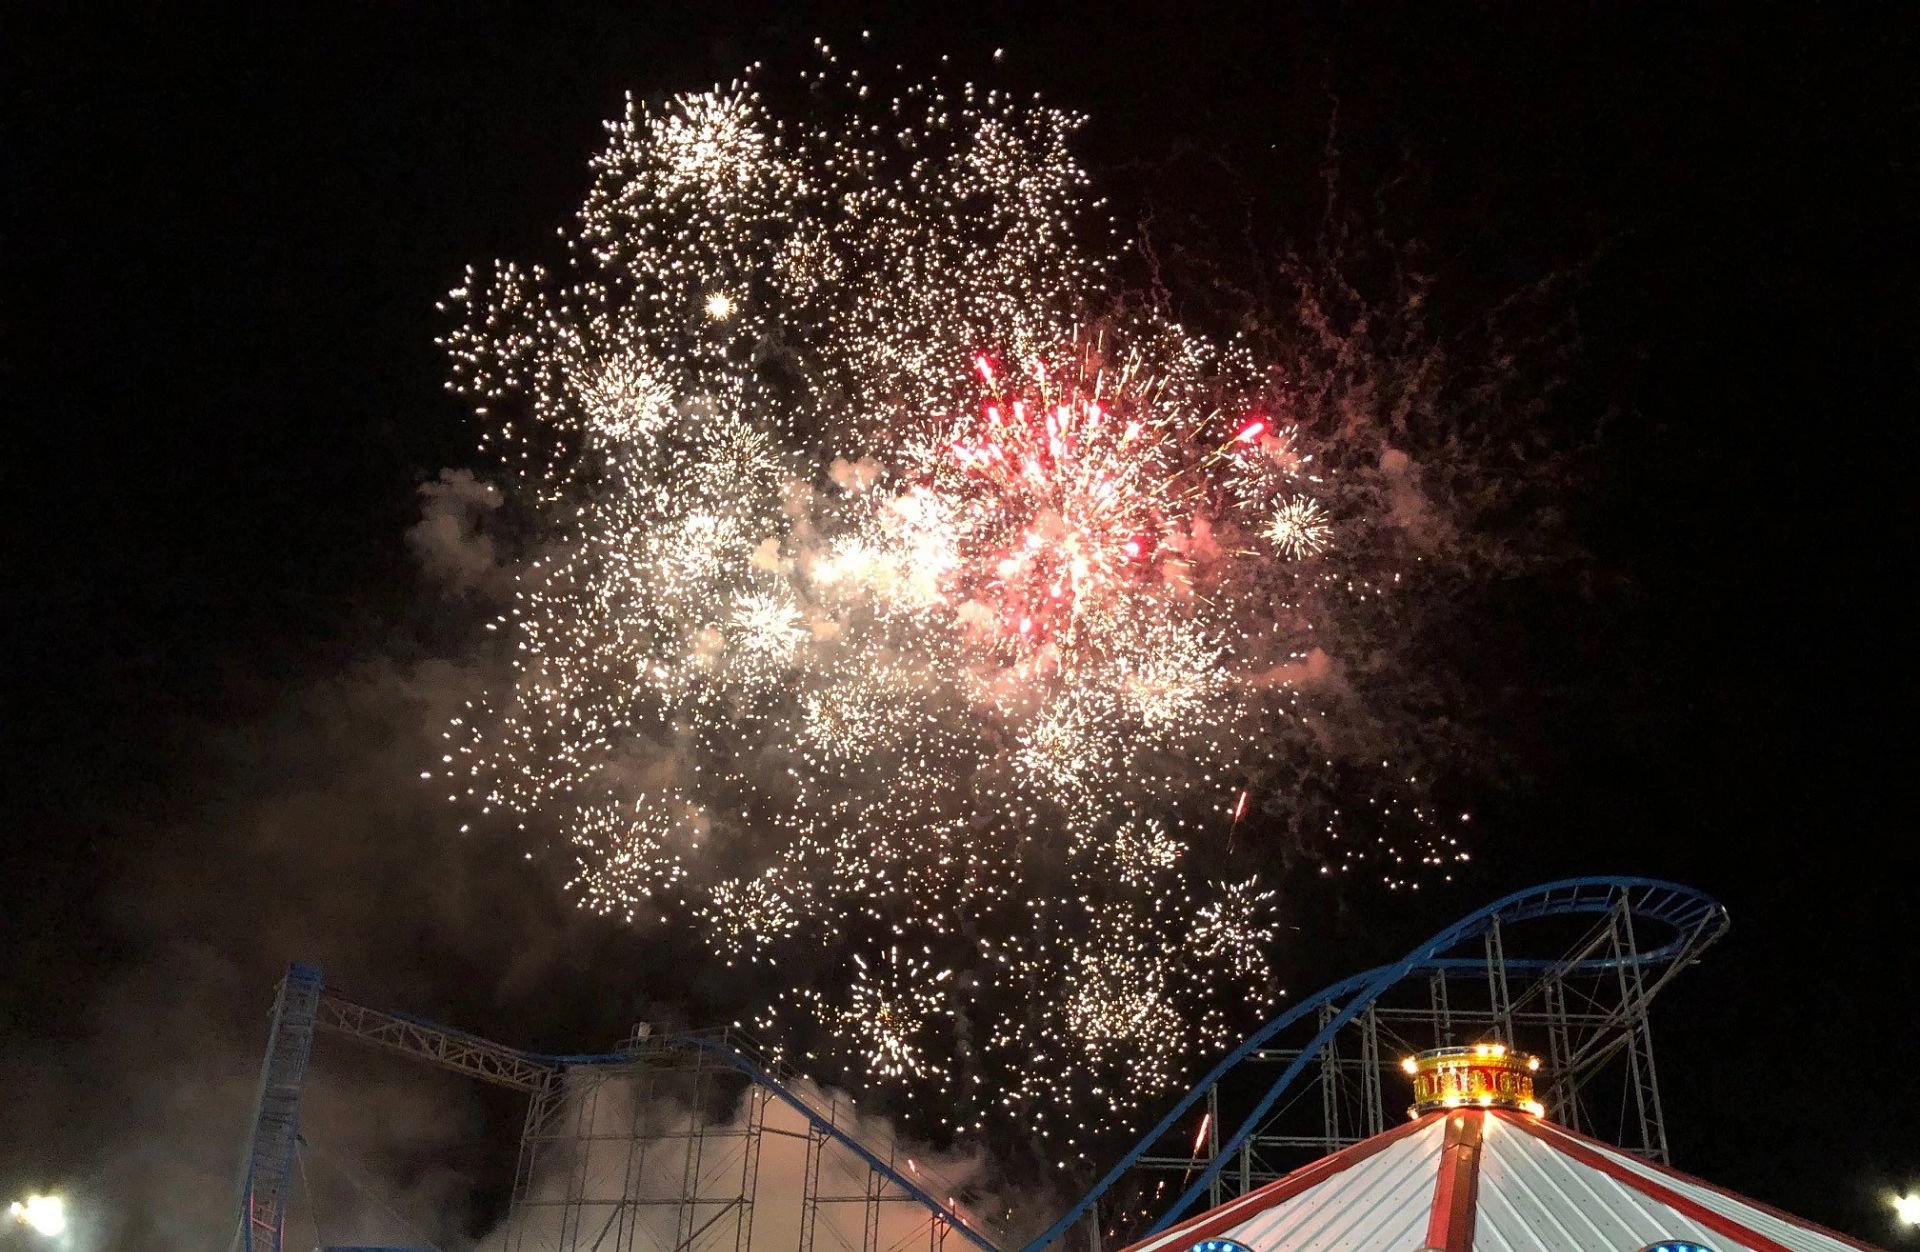 night sky with fireworks and roller coaster in background